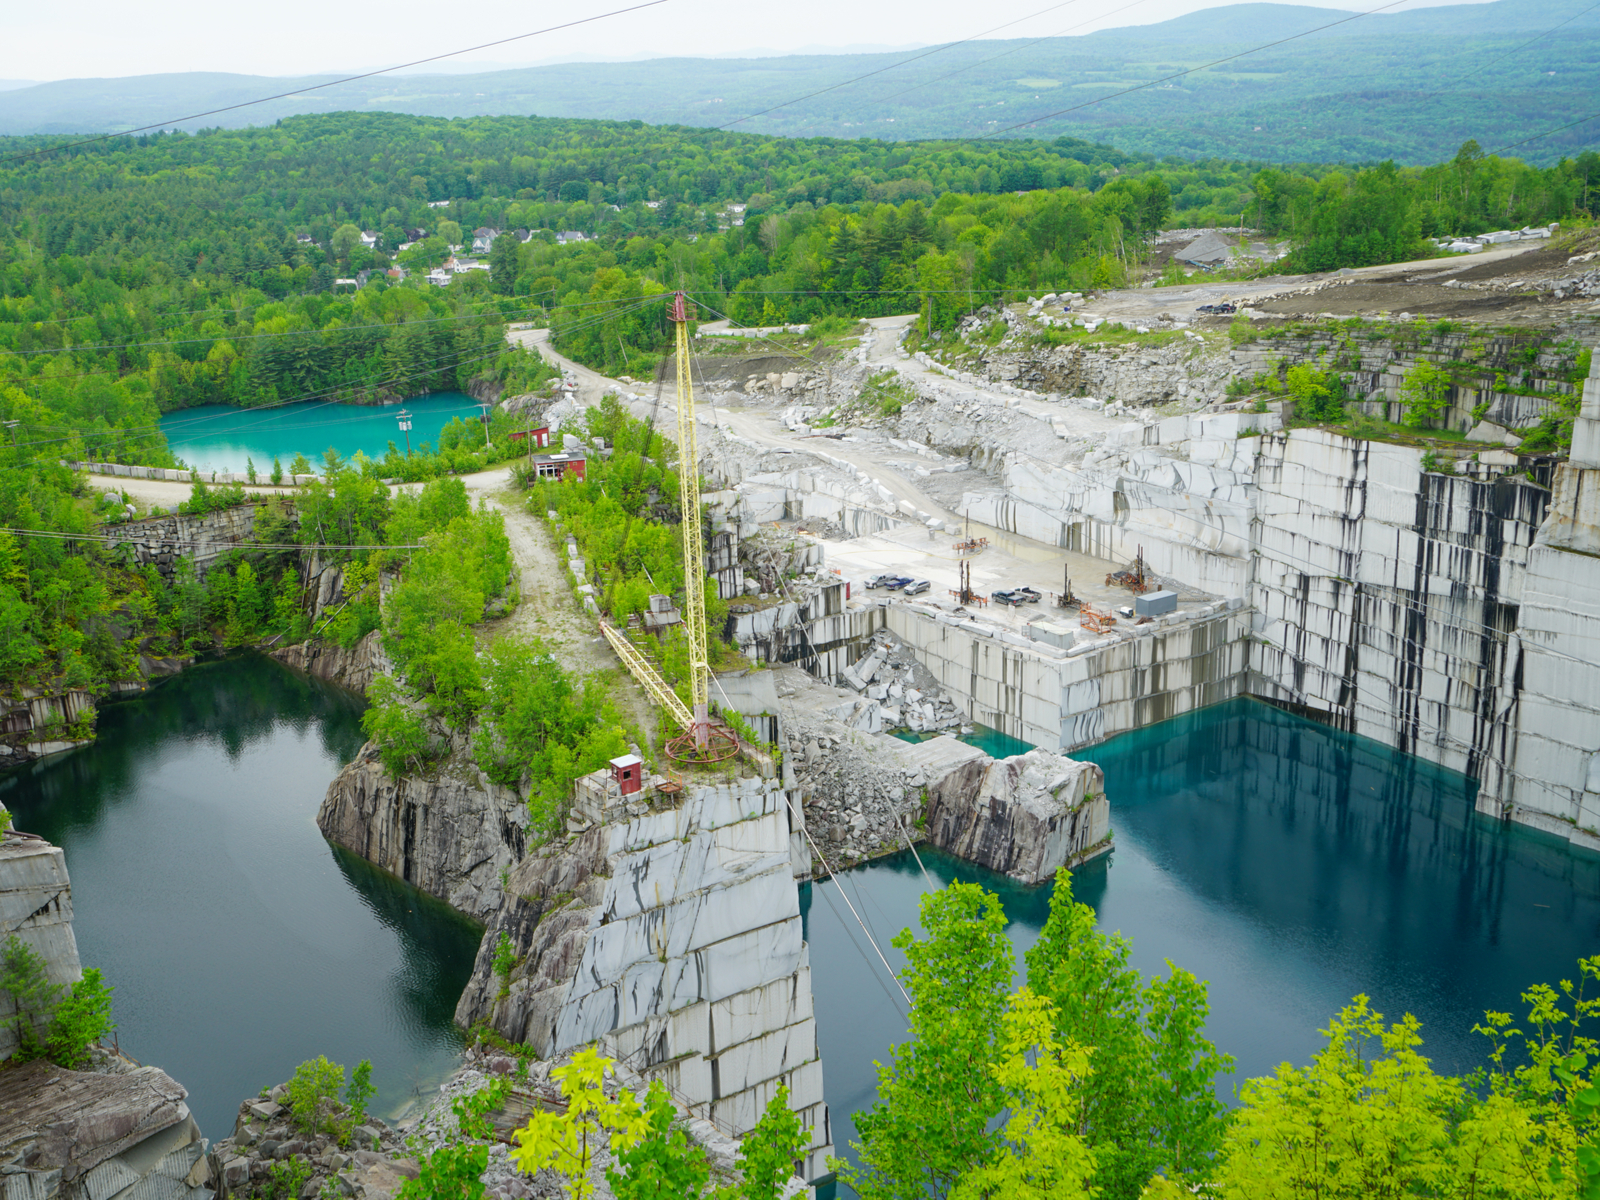 Rock of ages quarry, one of our top picks for the best places to visit in Vermont